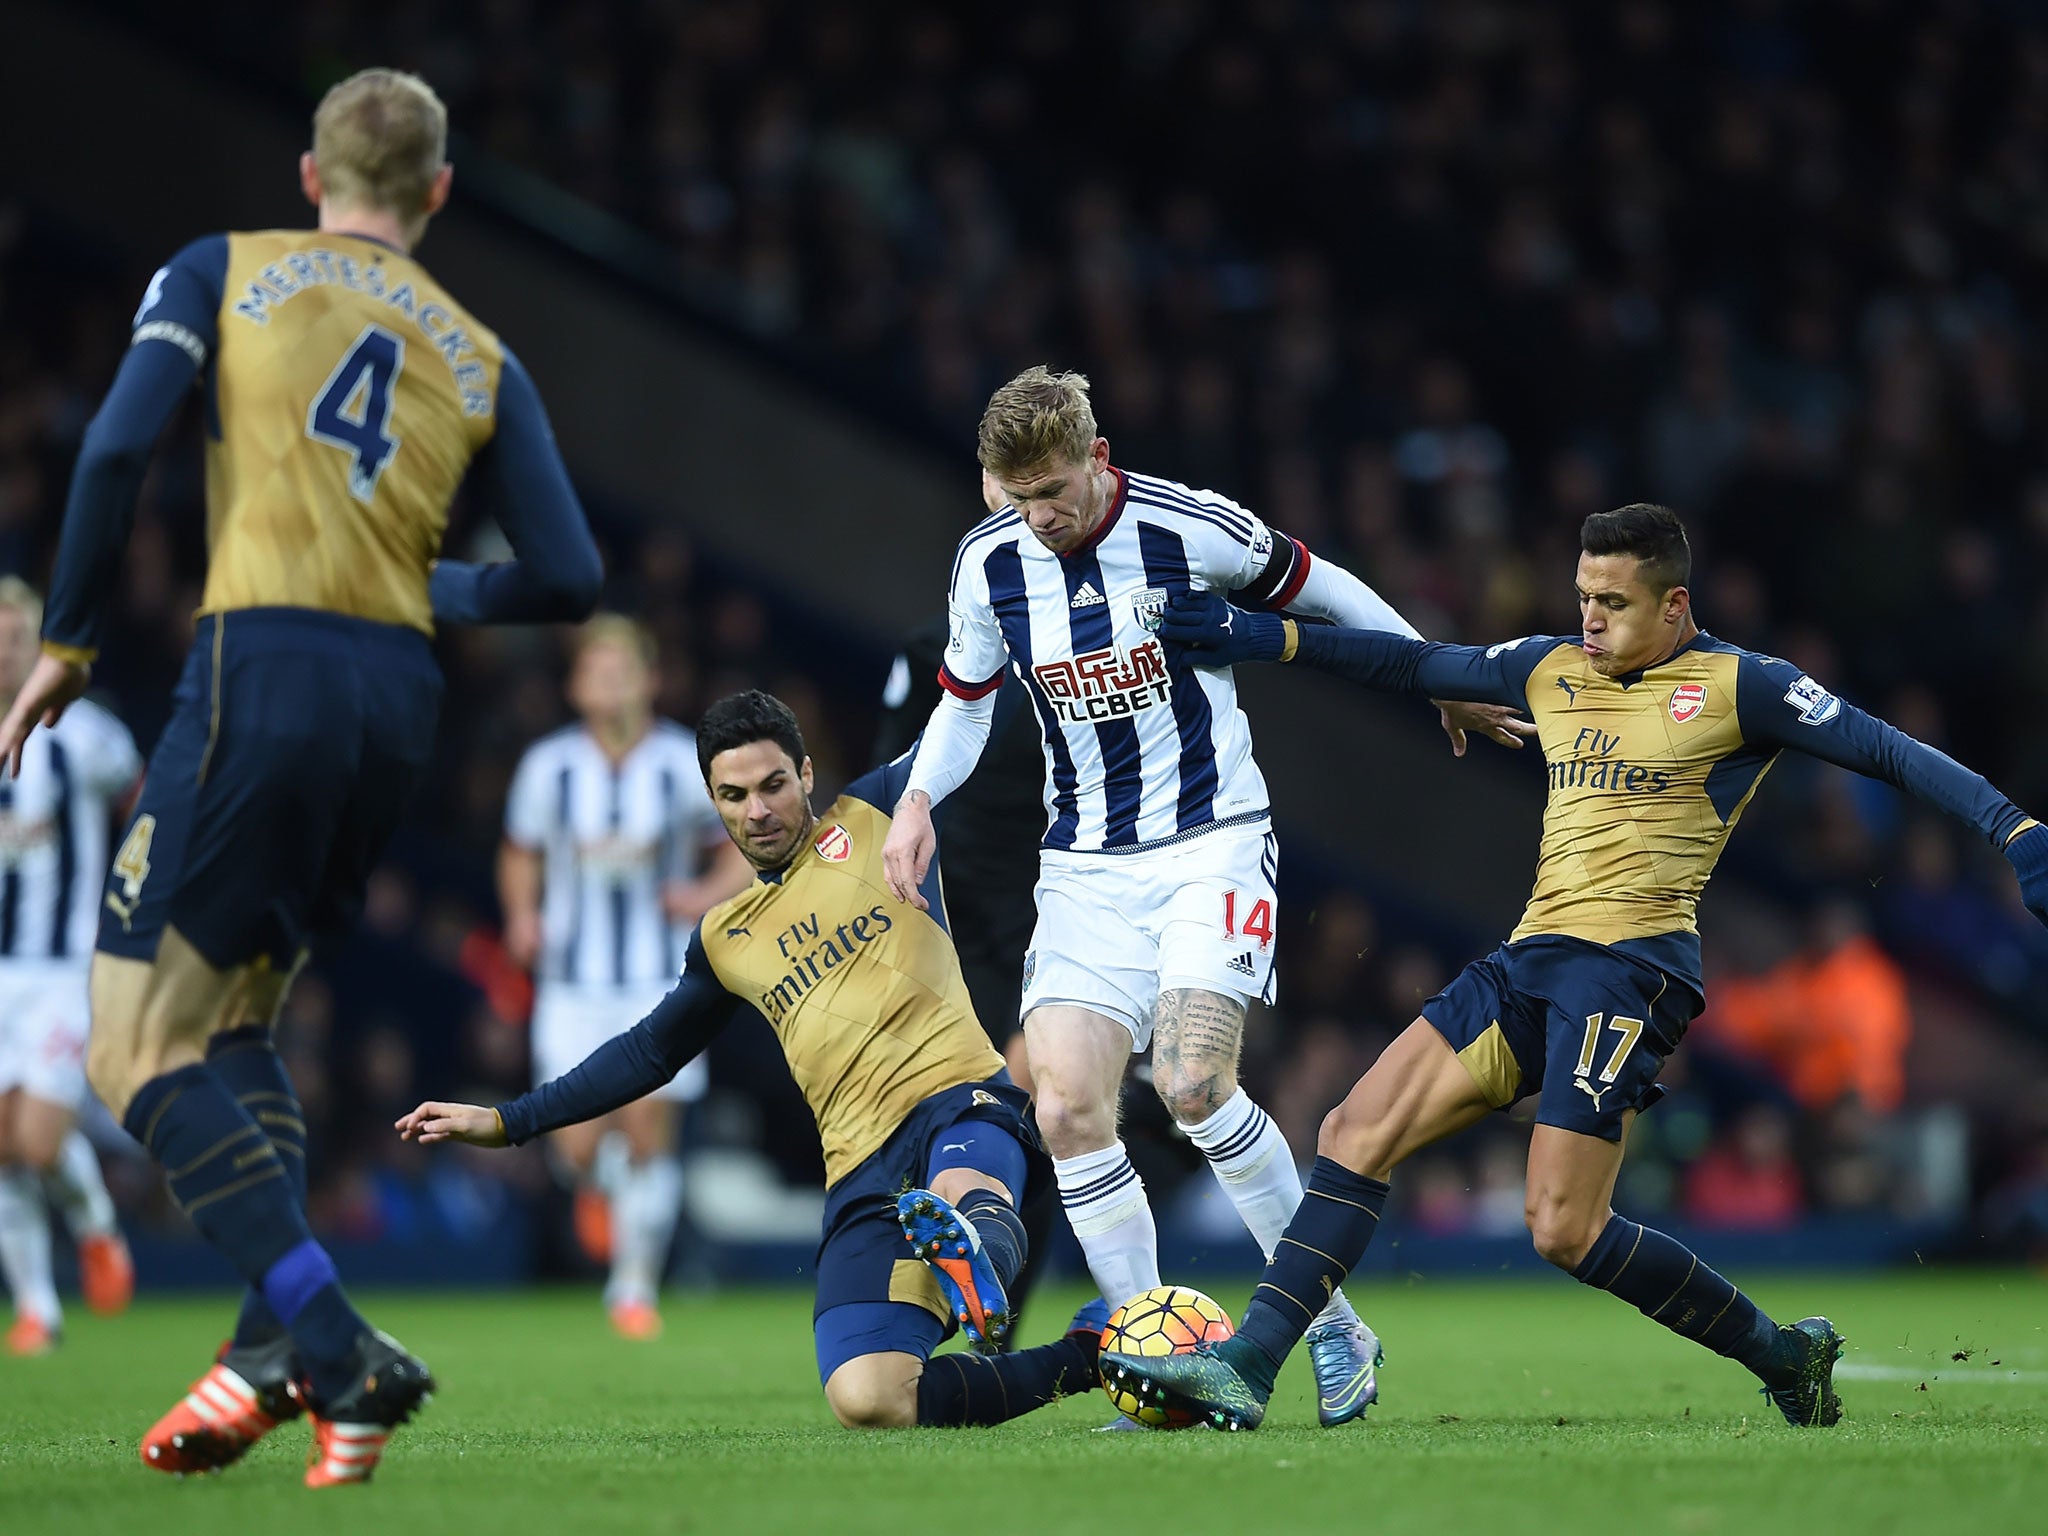 Mikel Arteta concedes the foul which West Brom equalise from